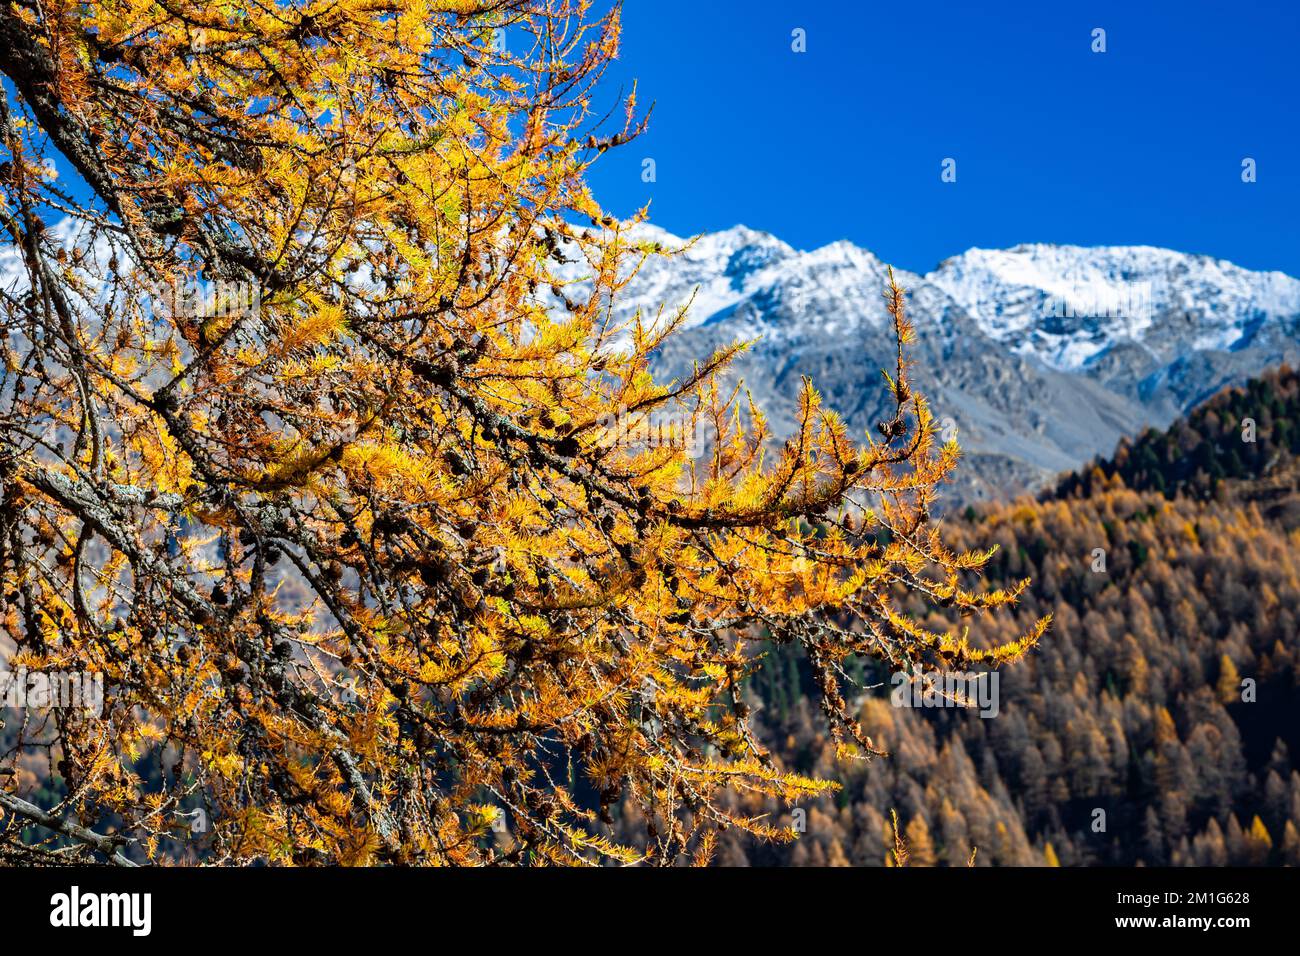 Beautiful yellow orange colored needles of a larch tree (Larix decidua) with snow capped mountains in the background Stock Photo